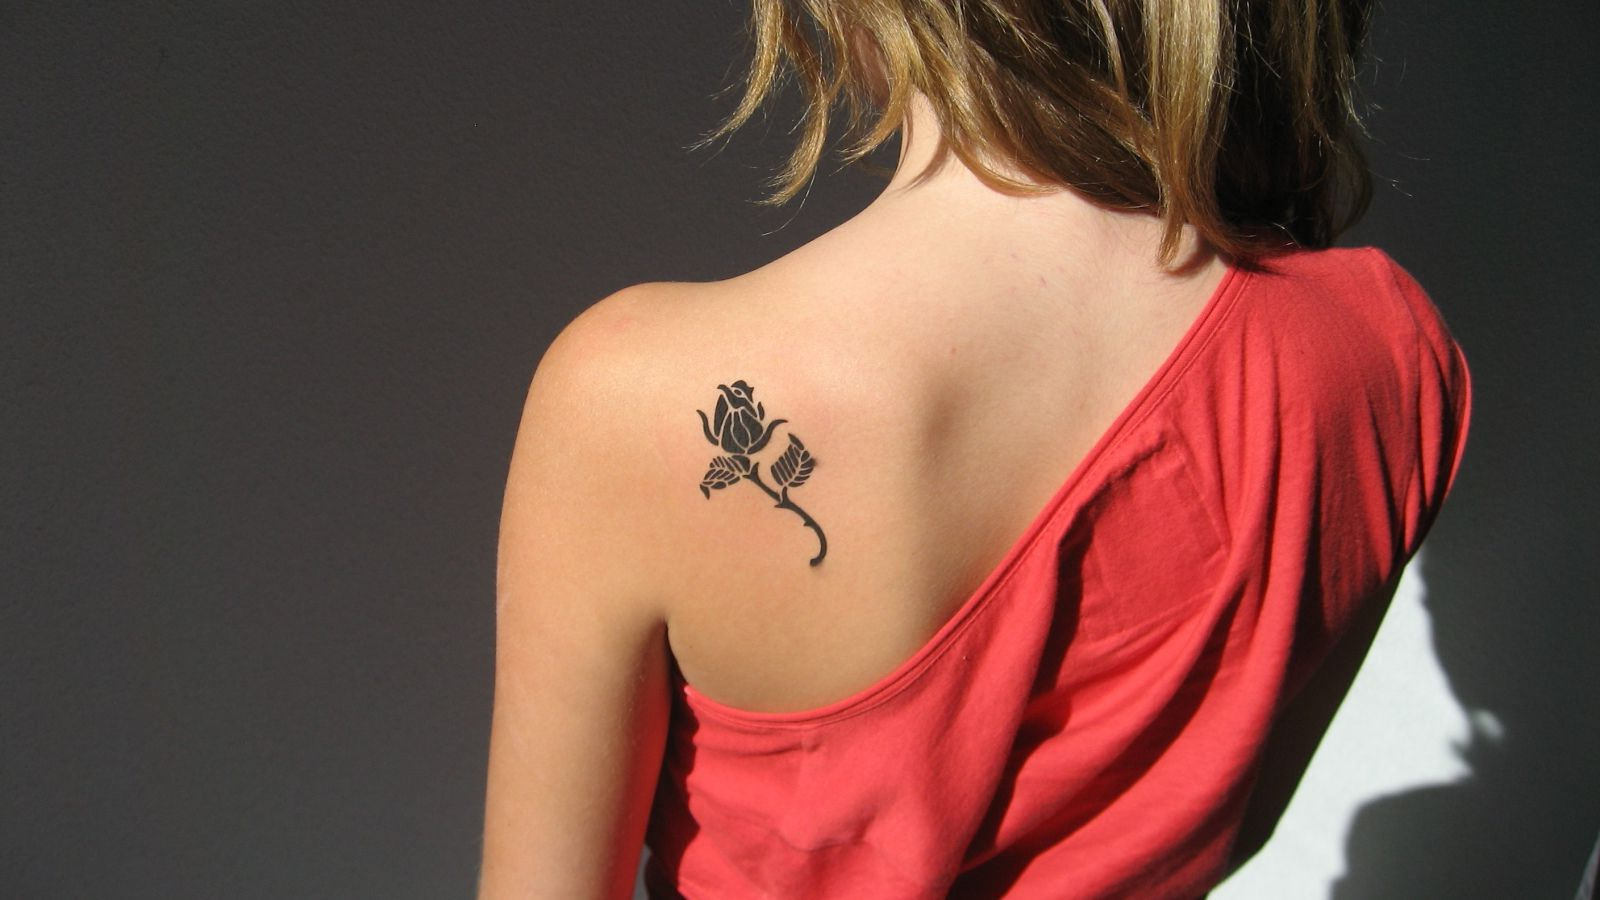 Girl Tattoos On Shoulder Blade 30 Small Cute Tattoos For Girls in dimensions 1600 X 900